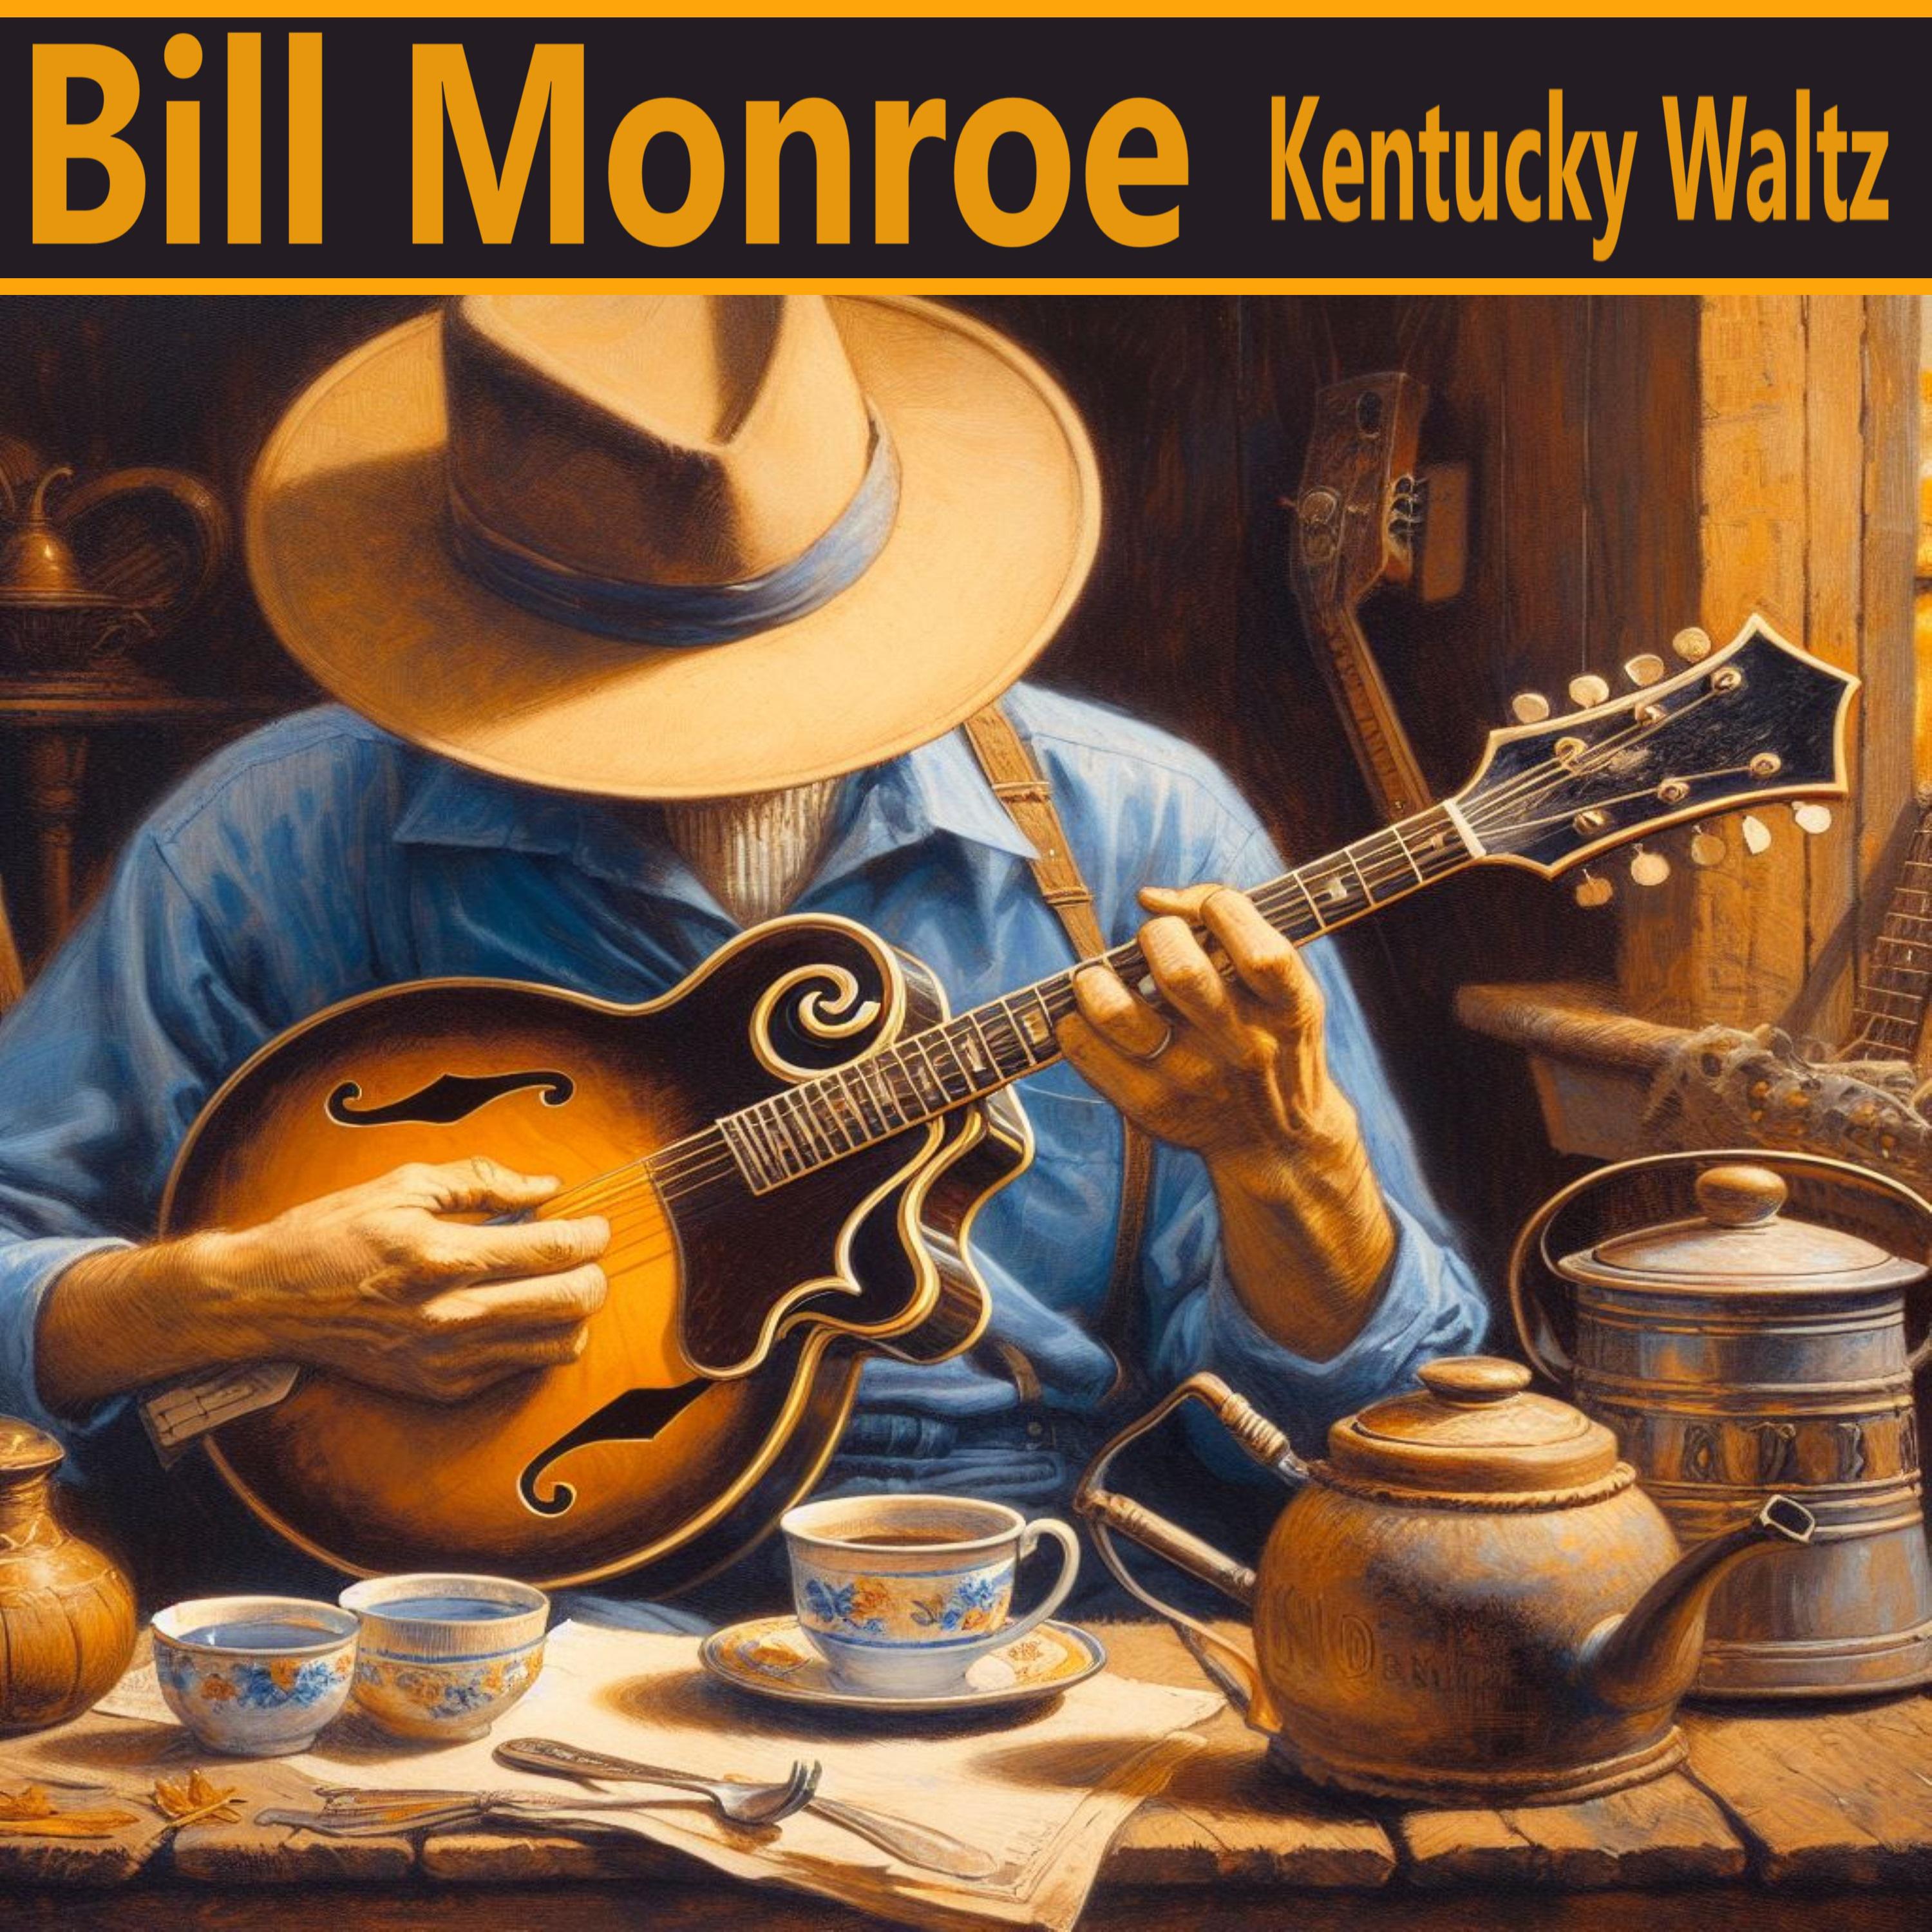 Bill Monroe - The Race Horse Song 'Molly and Tenbrooks'